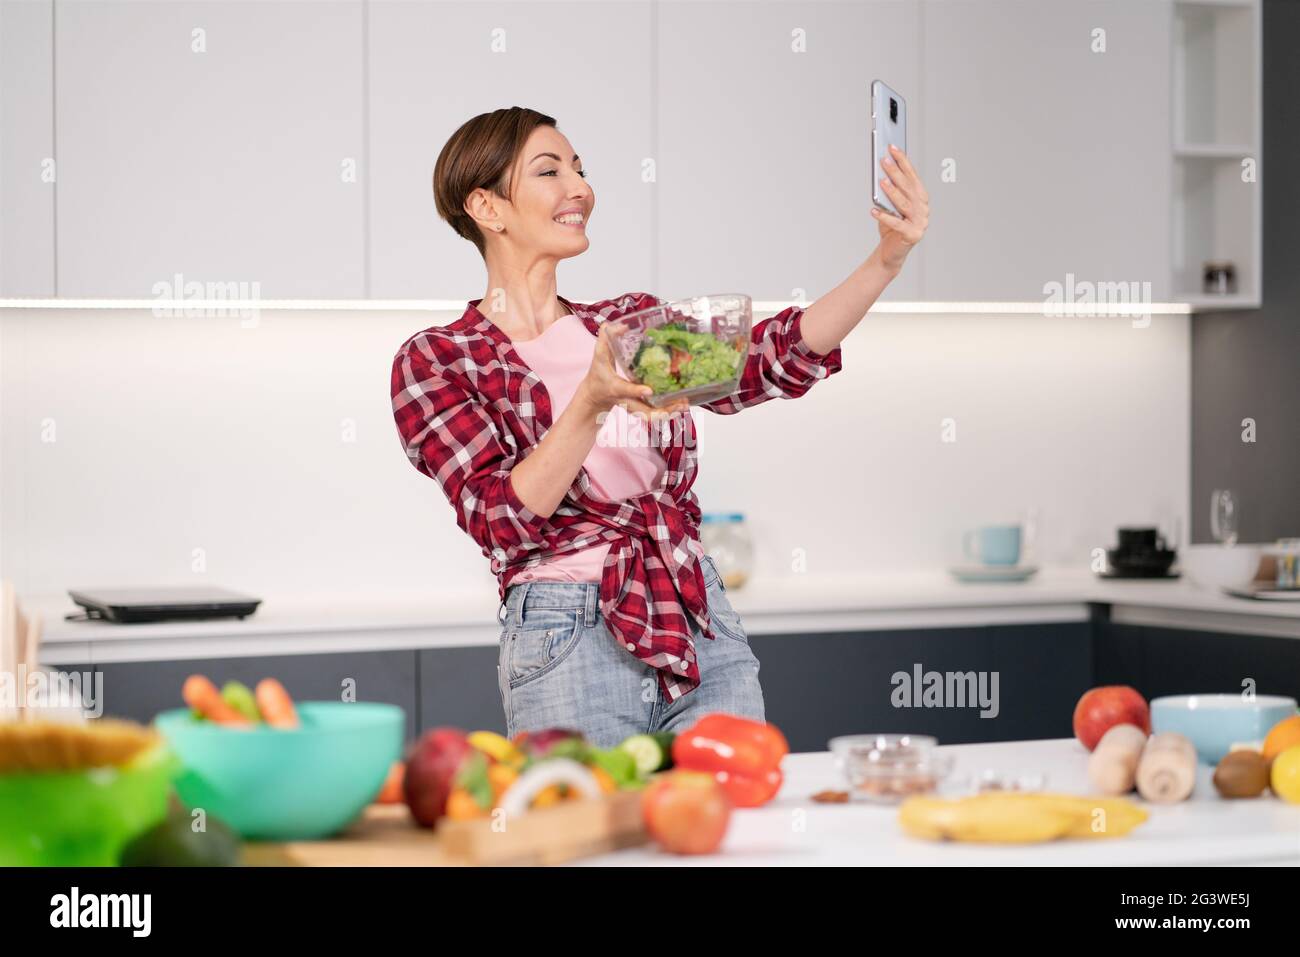 Pretty woman happy taking selfie using her smartphone while cooking fresh salad wearing a plaid shirt with a bob hair style. Hea Stock Photo